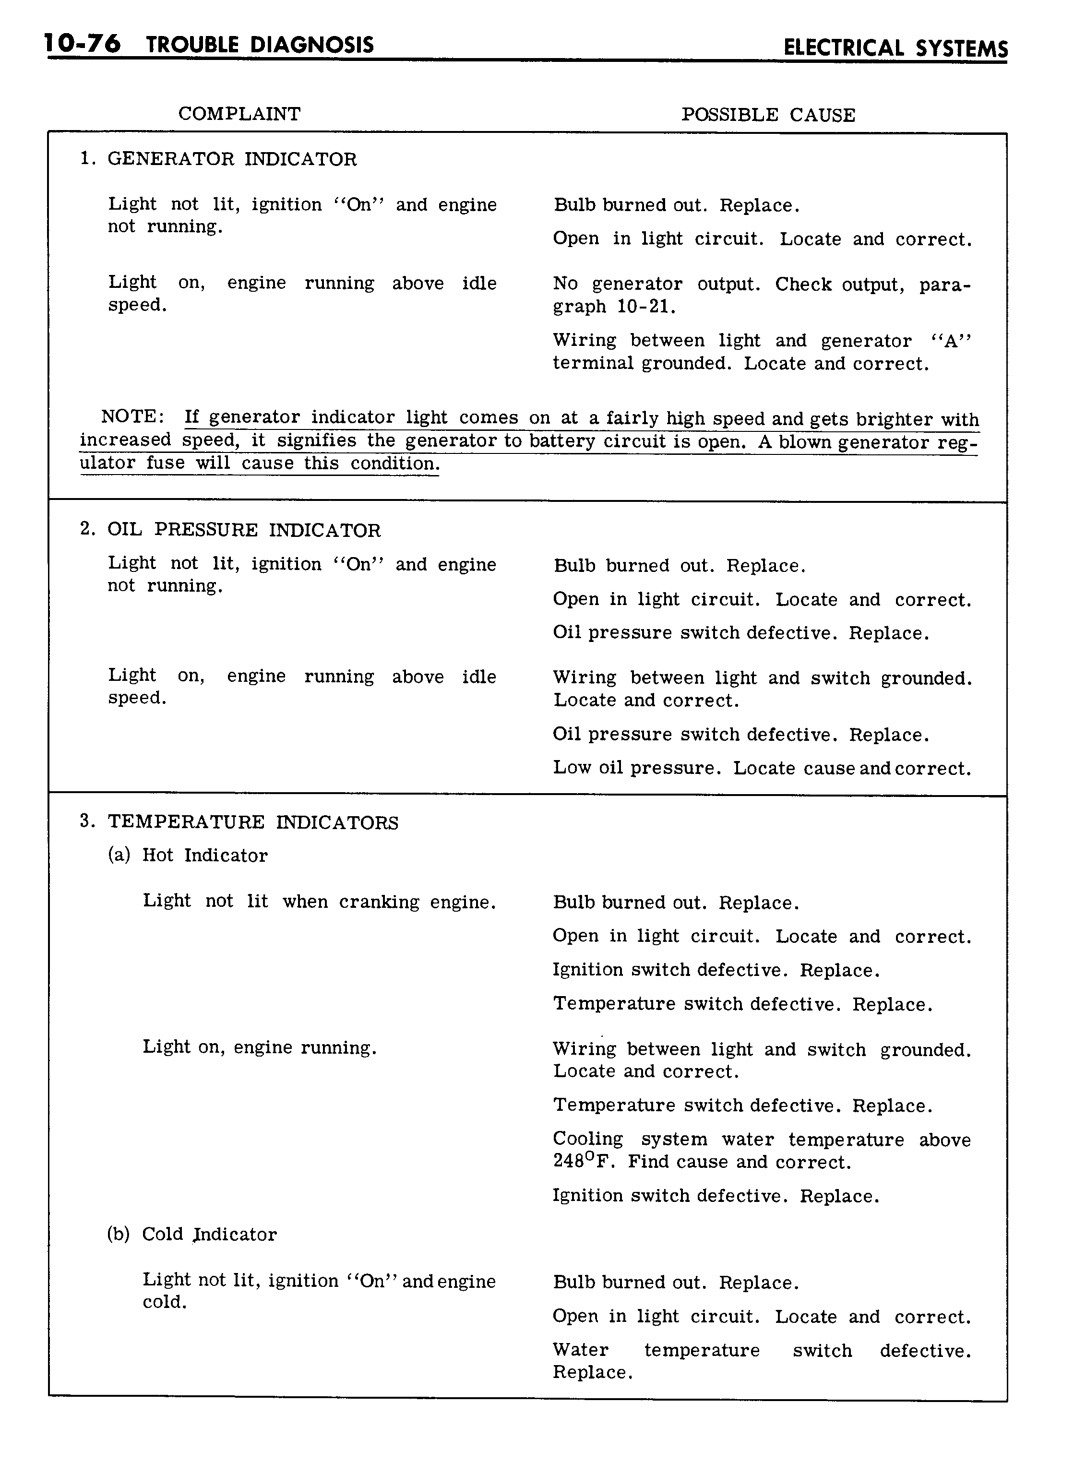 n_10 1961 Buick Shop Manual - Electrical Systems-076-076.jpg